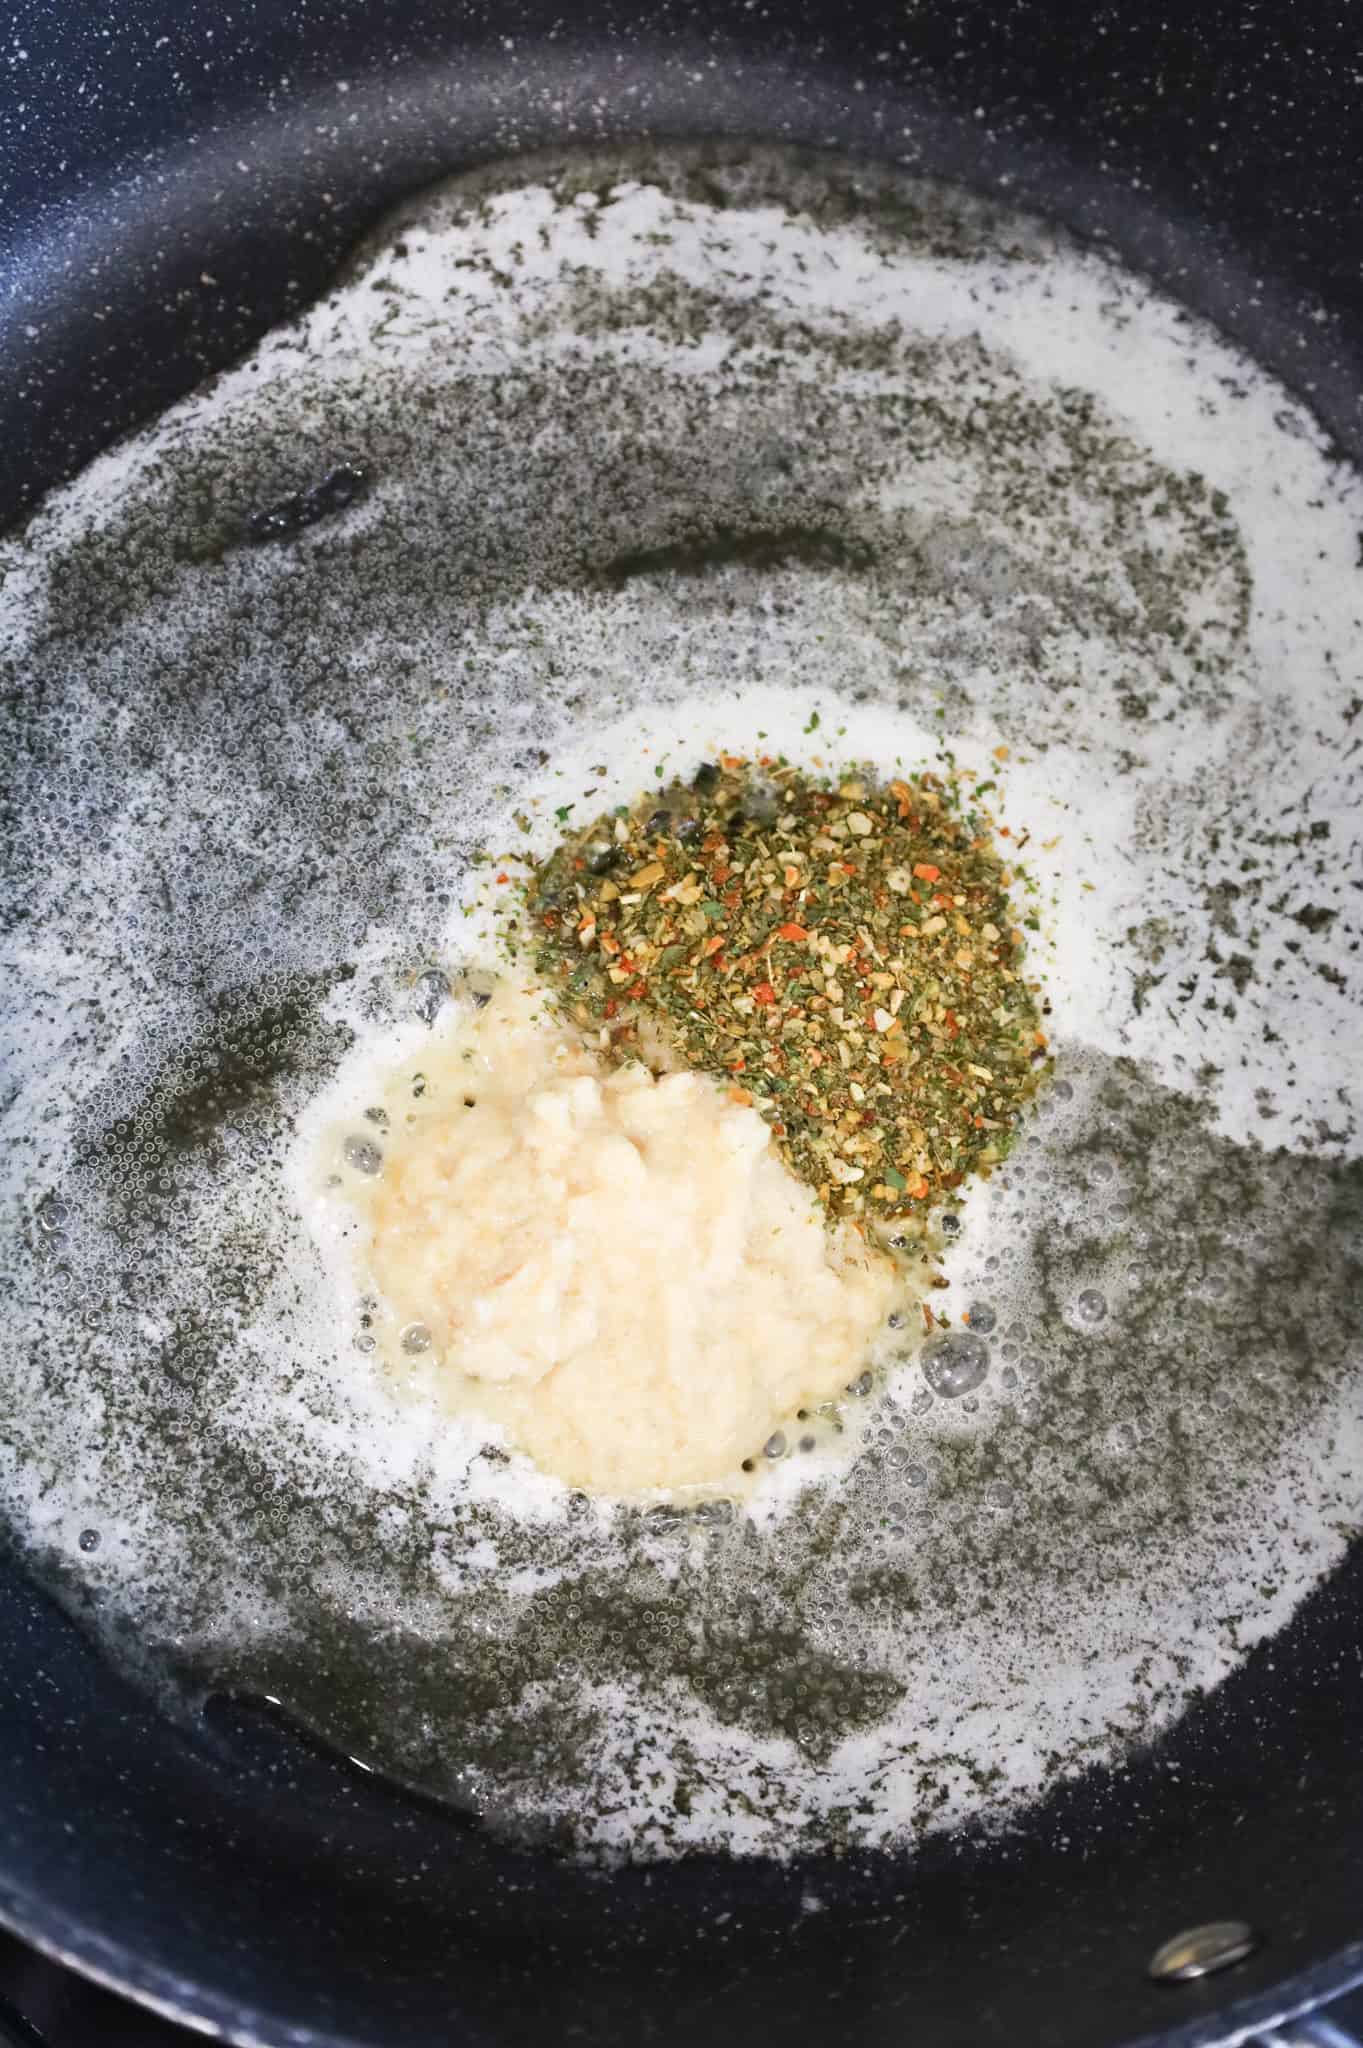 Italian seasoning and garlic puree added to a skillet with melted butter